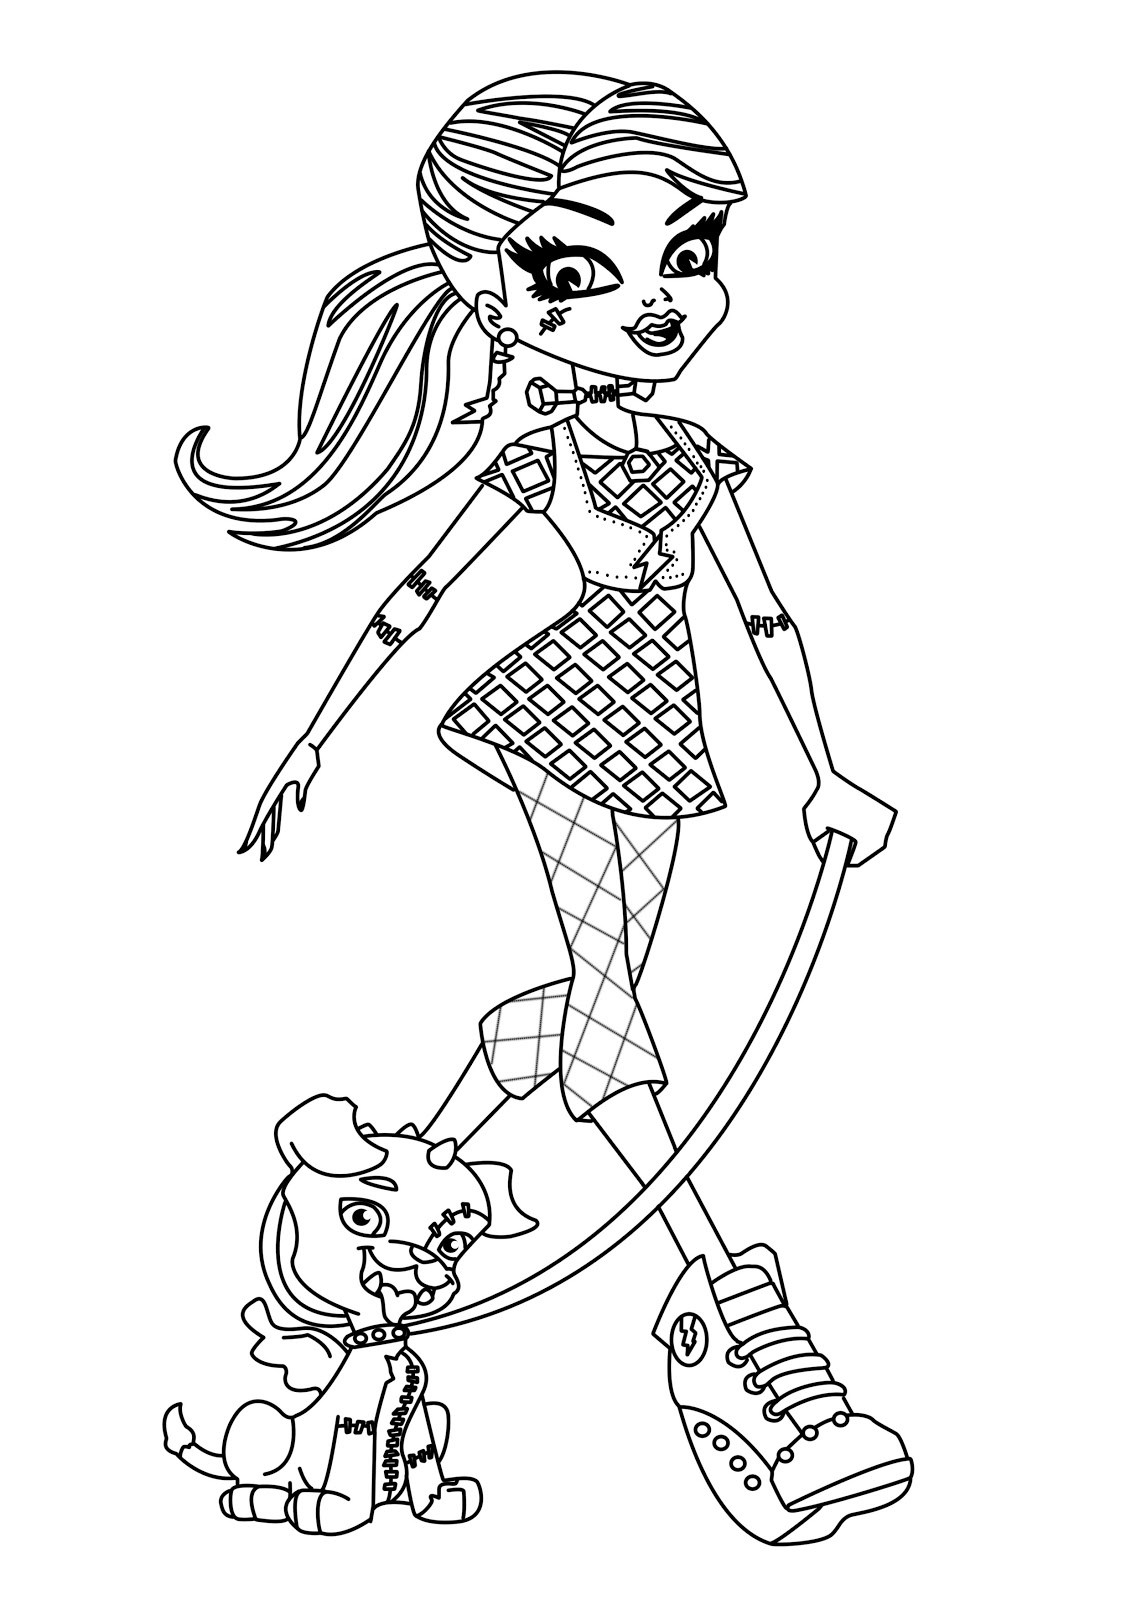 Monster High Free Coloring Image Pages To Print – Colorpages dedans Image Monster High A Imprimer 